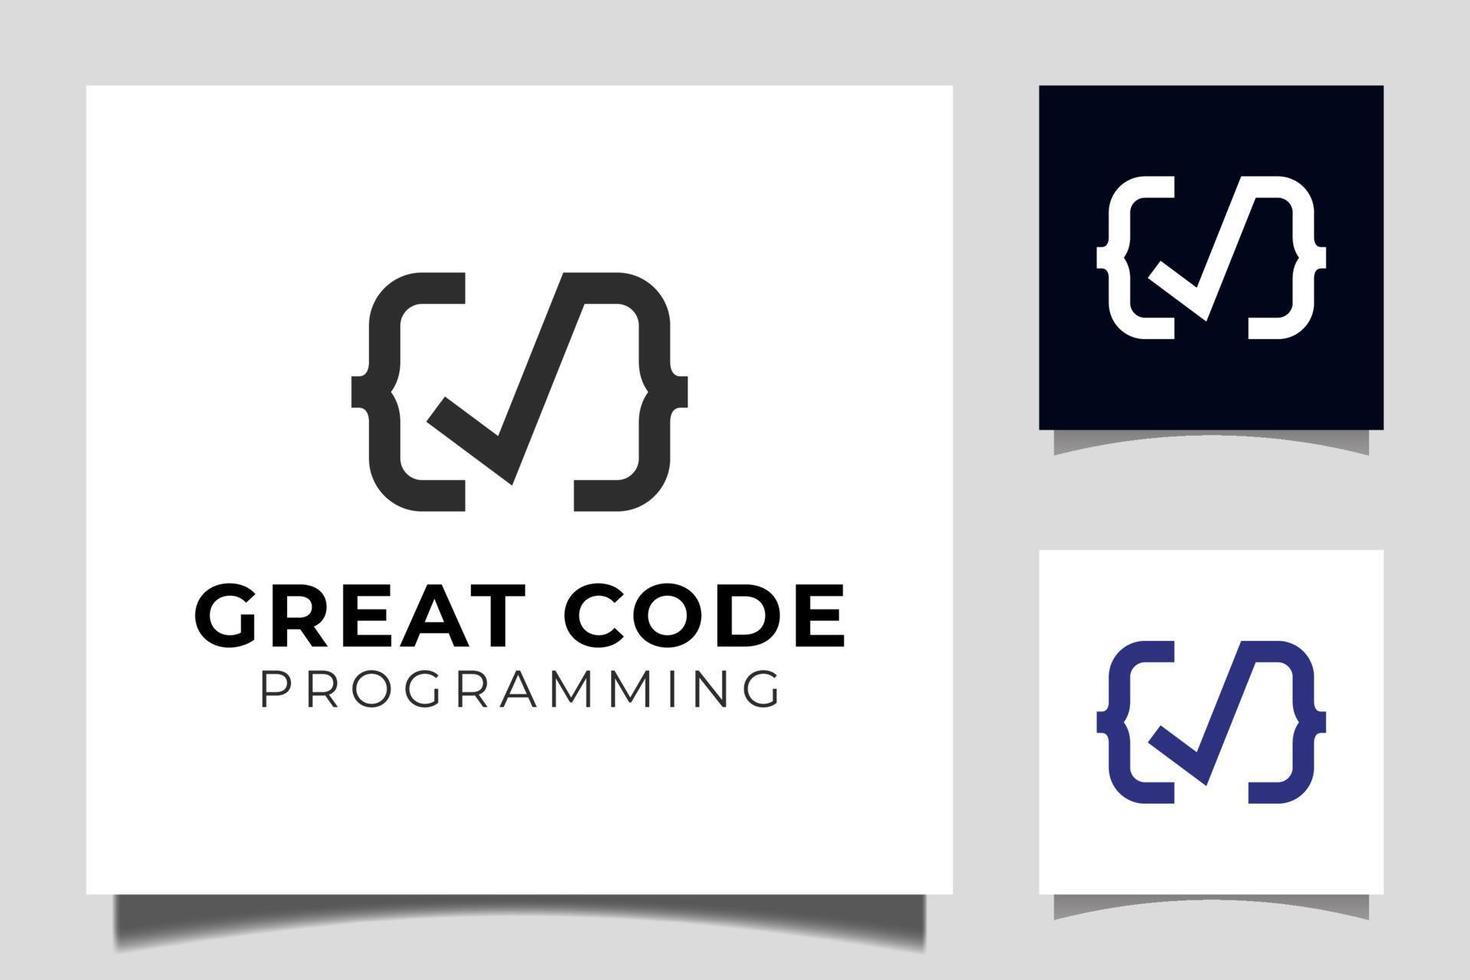 greats code logo design with check ,correct, valid icon vector symbol for coding and programming logo template